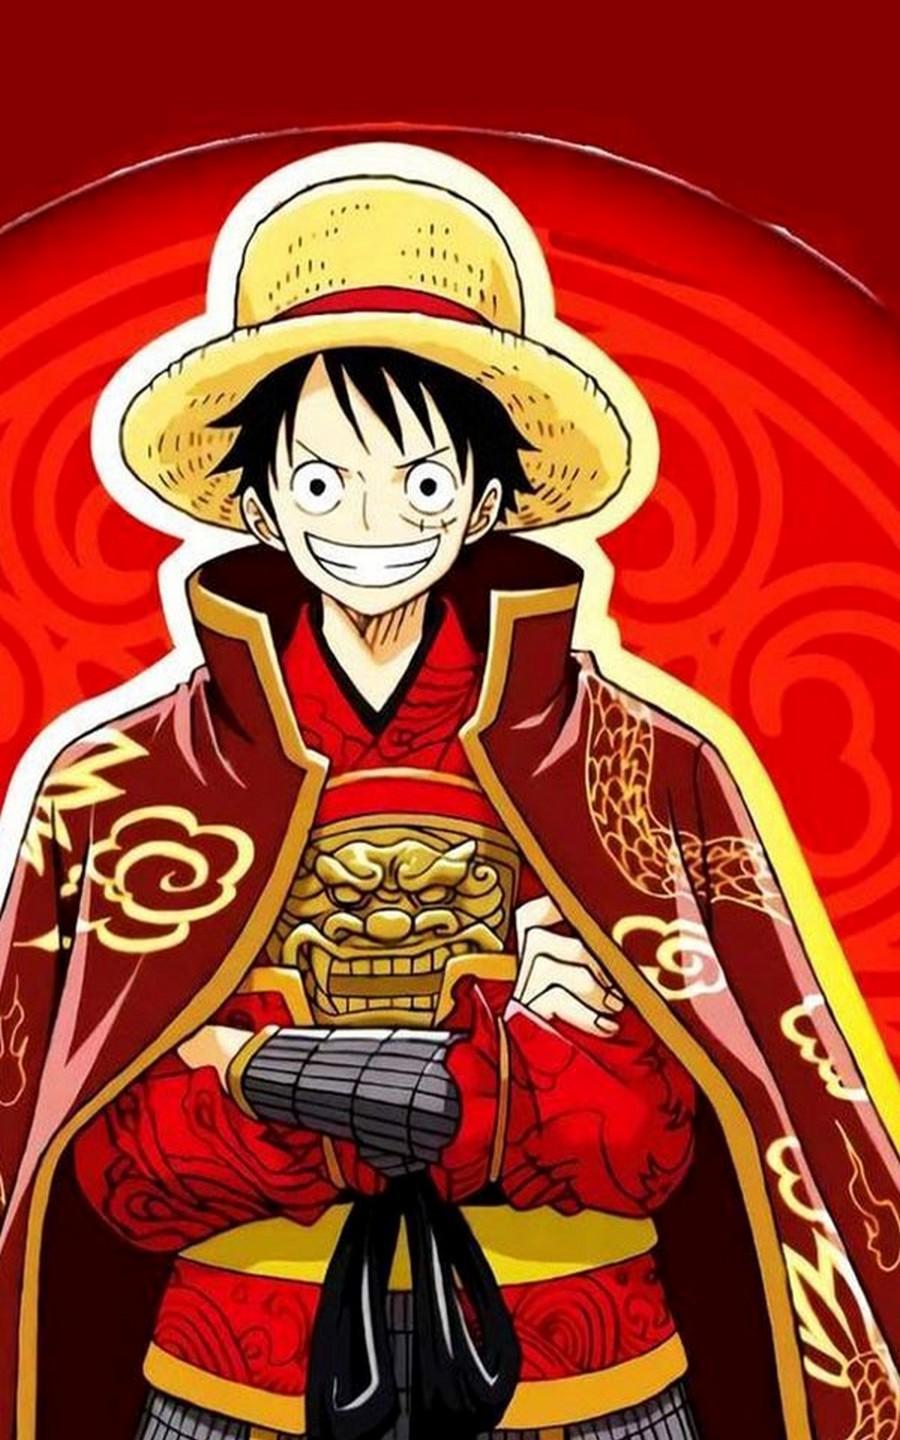 Monkey D Luffy Wallpapers FansArt for Android - APK Download